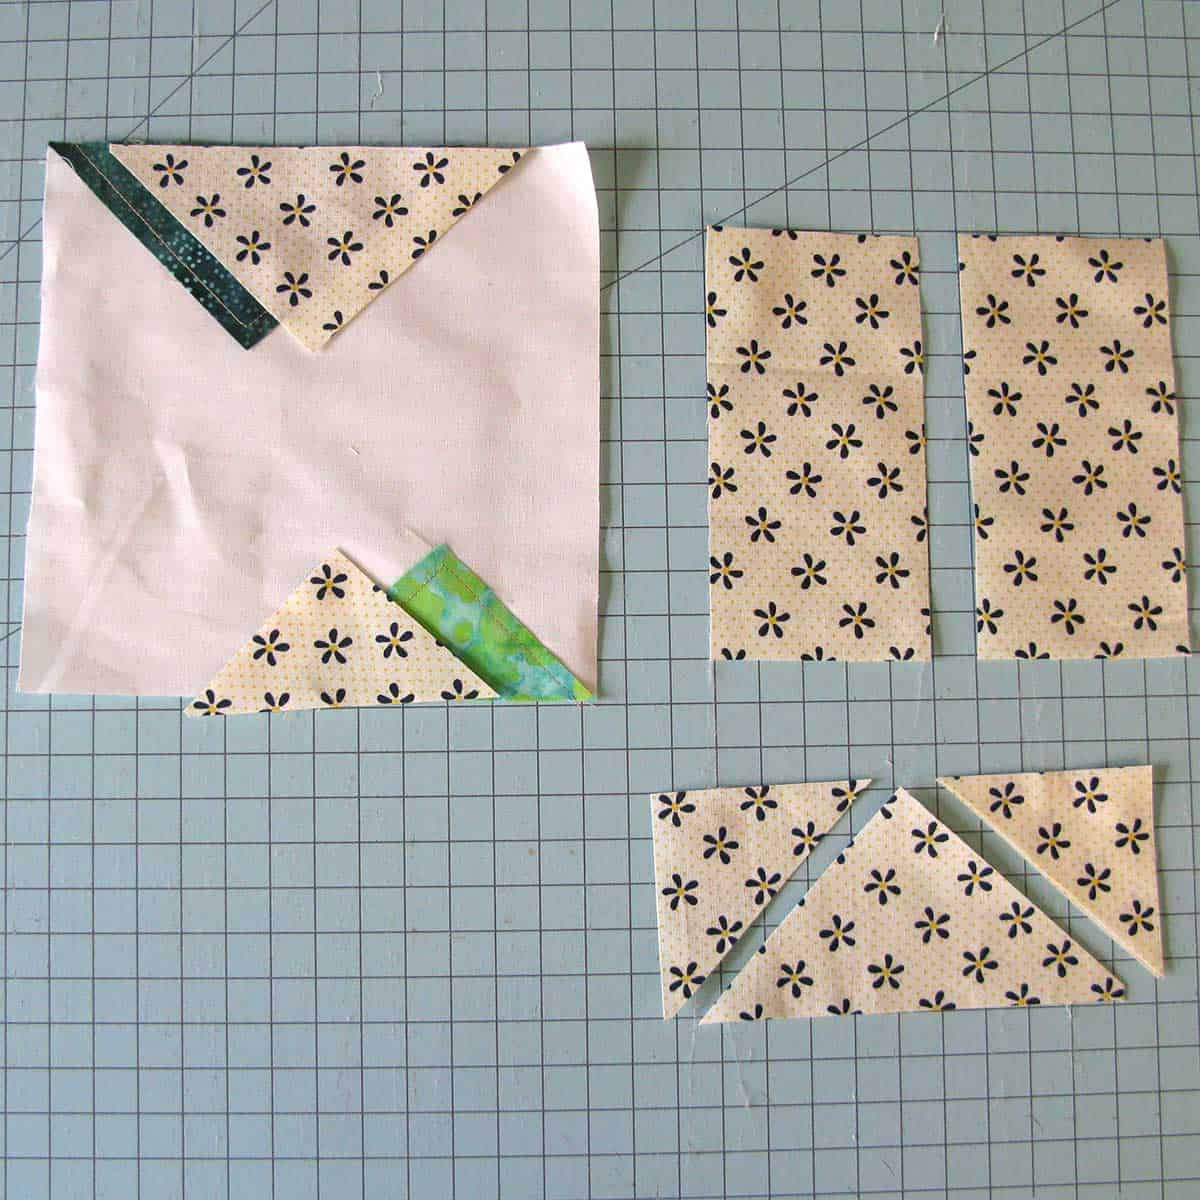 Cutting the charm squares